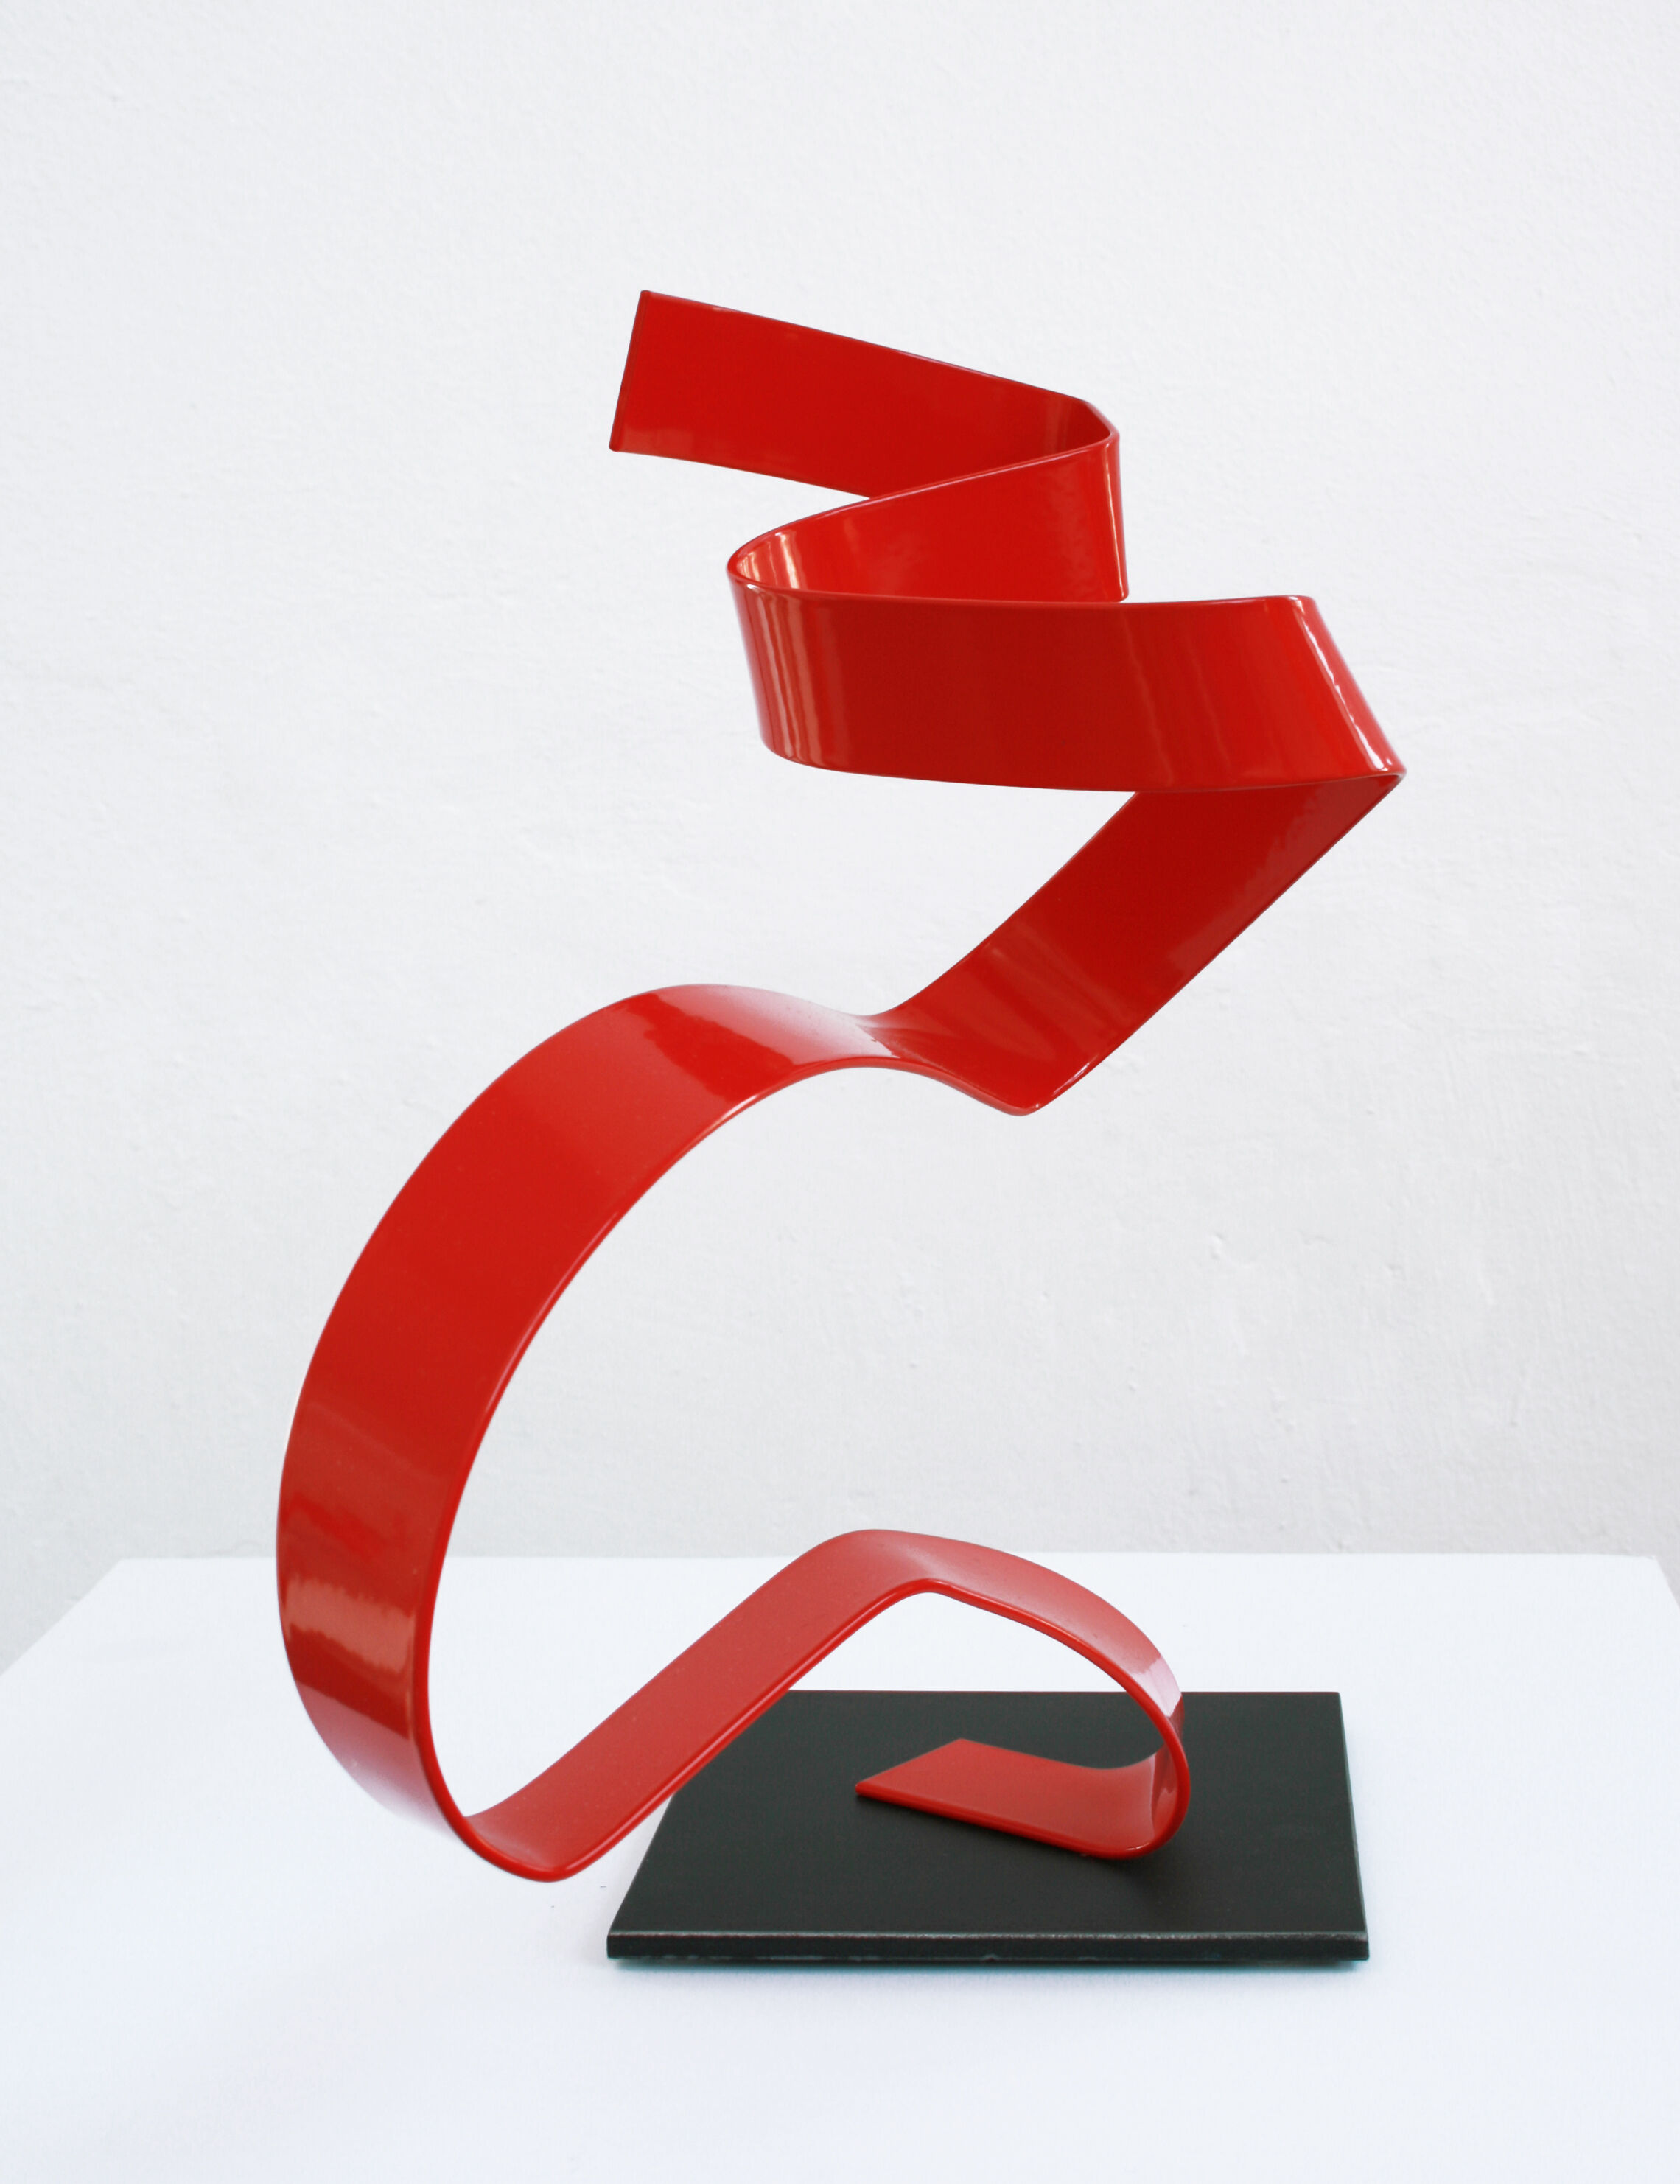 Sculpture "from the series: small enthusiasts (Red I)" (2021)